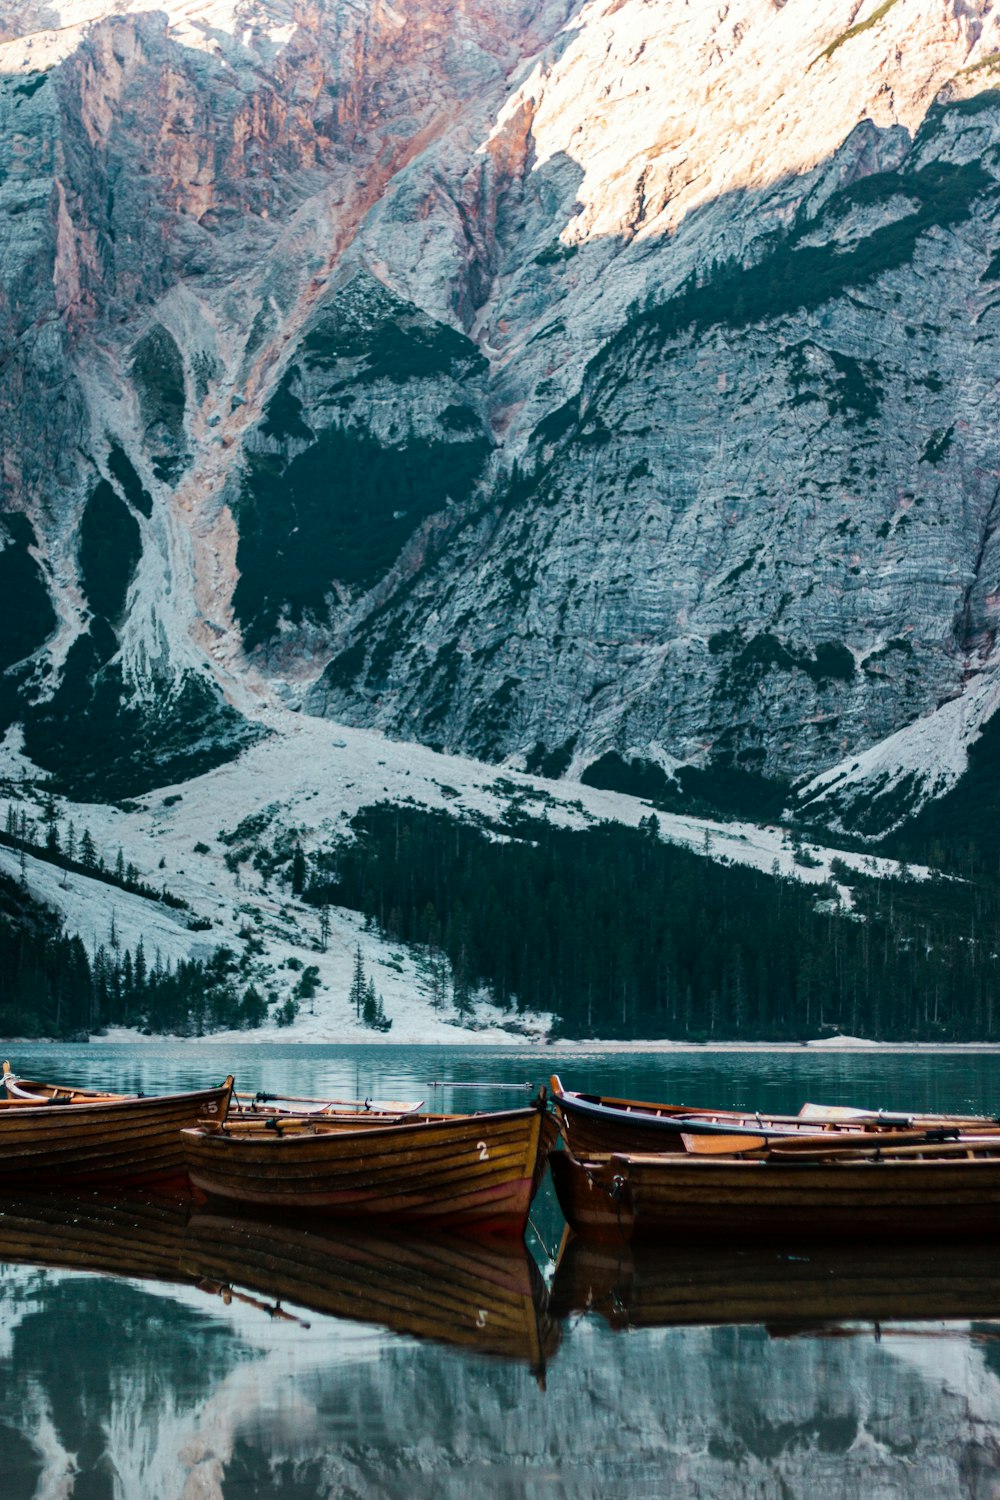 a group of boats in a body of water by a rocky mountain